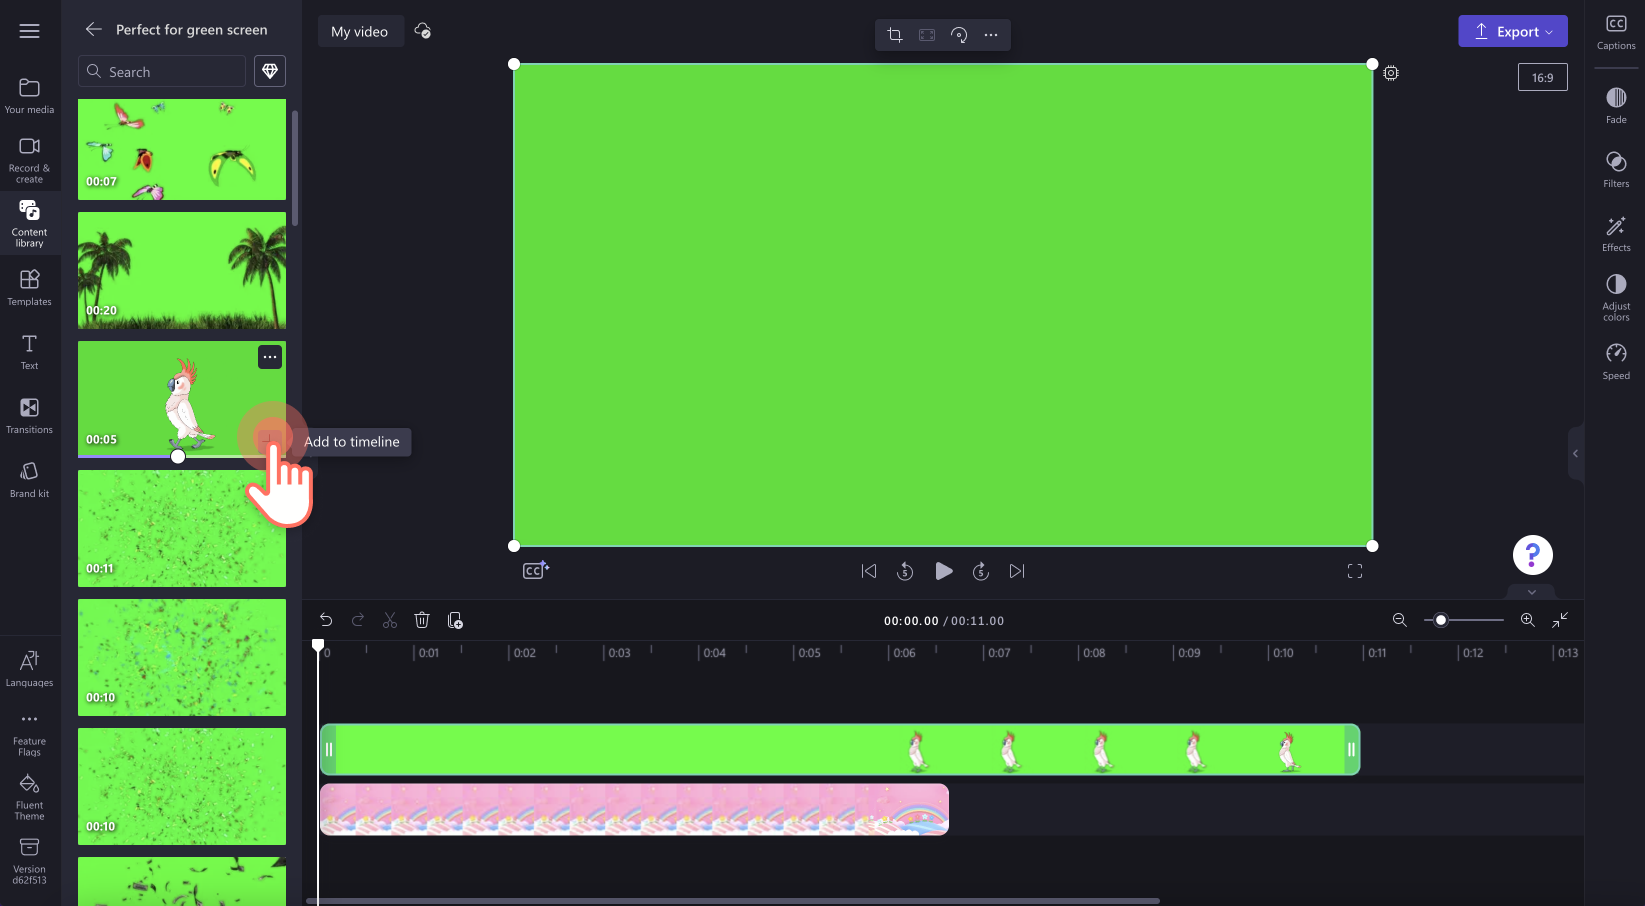 An image of a user adding a green screen stock video to the timeline.